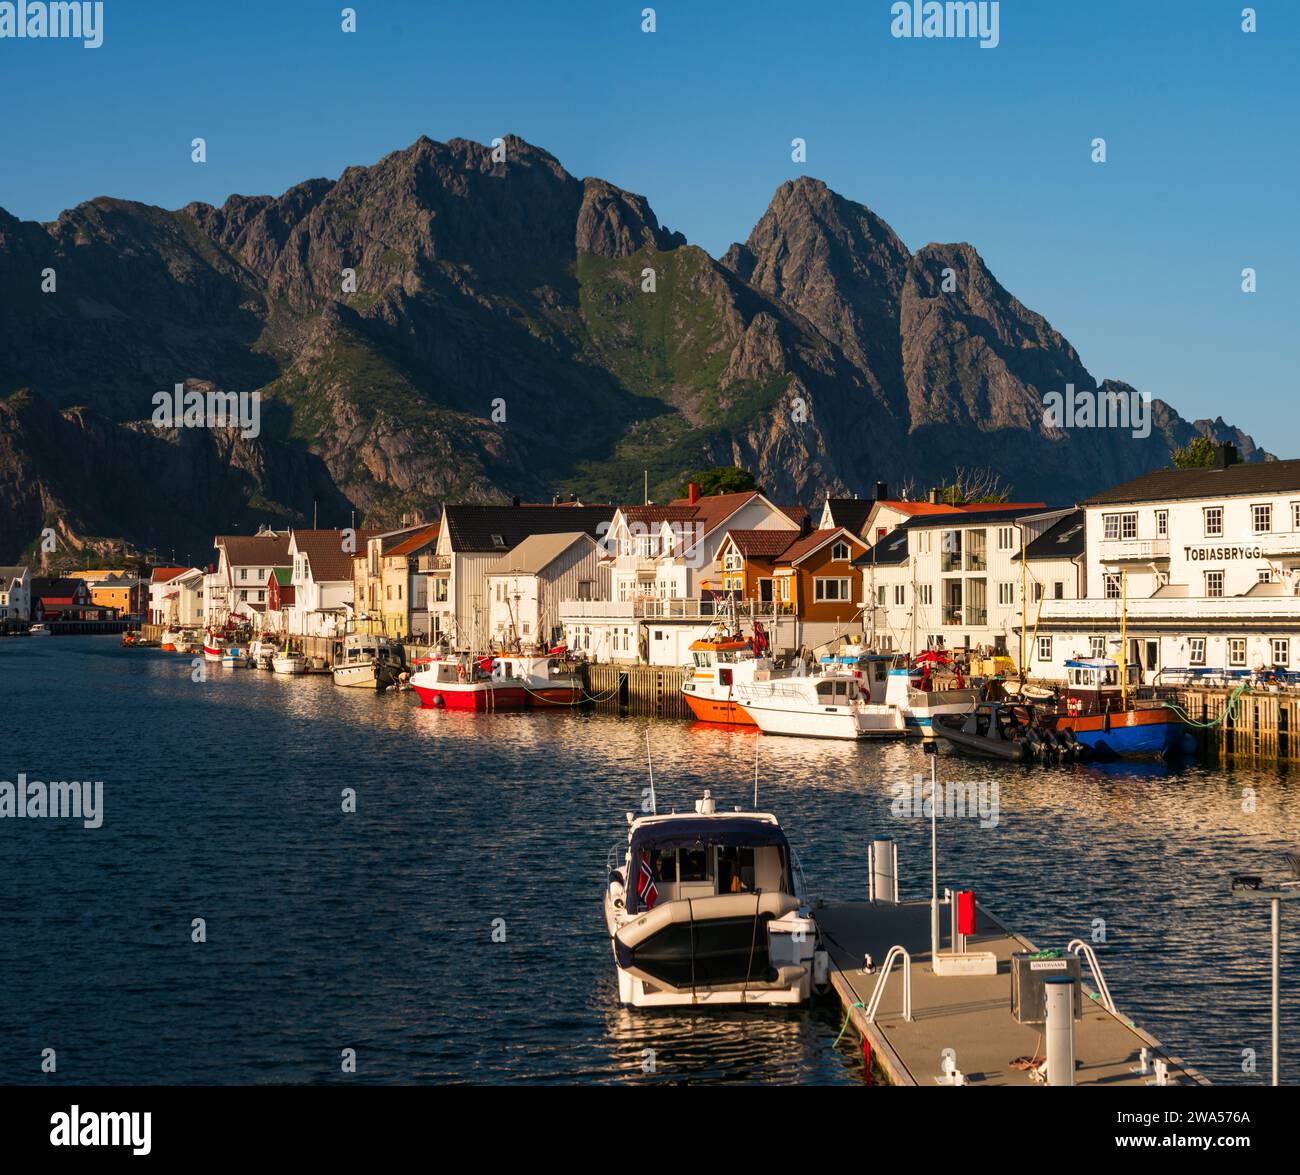 The small village of Henningsvaer on the southern coast of Lofoten, on a bright summer evening, fishing boats and sailboats alongside colorful houses. Stock Photo